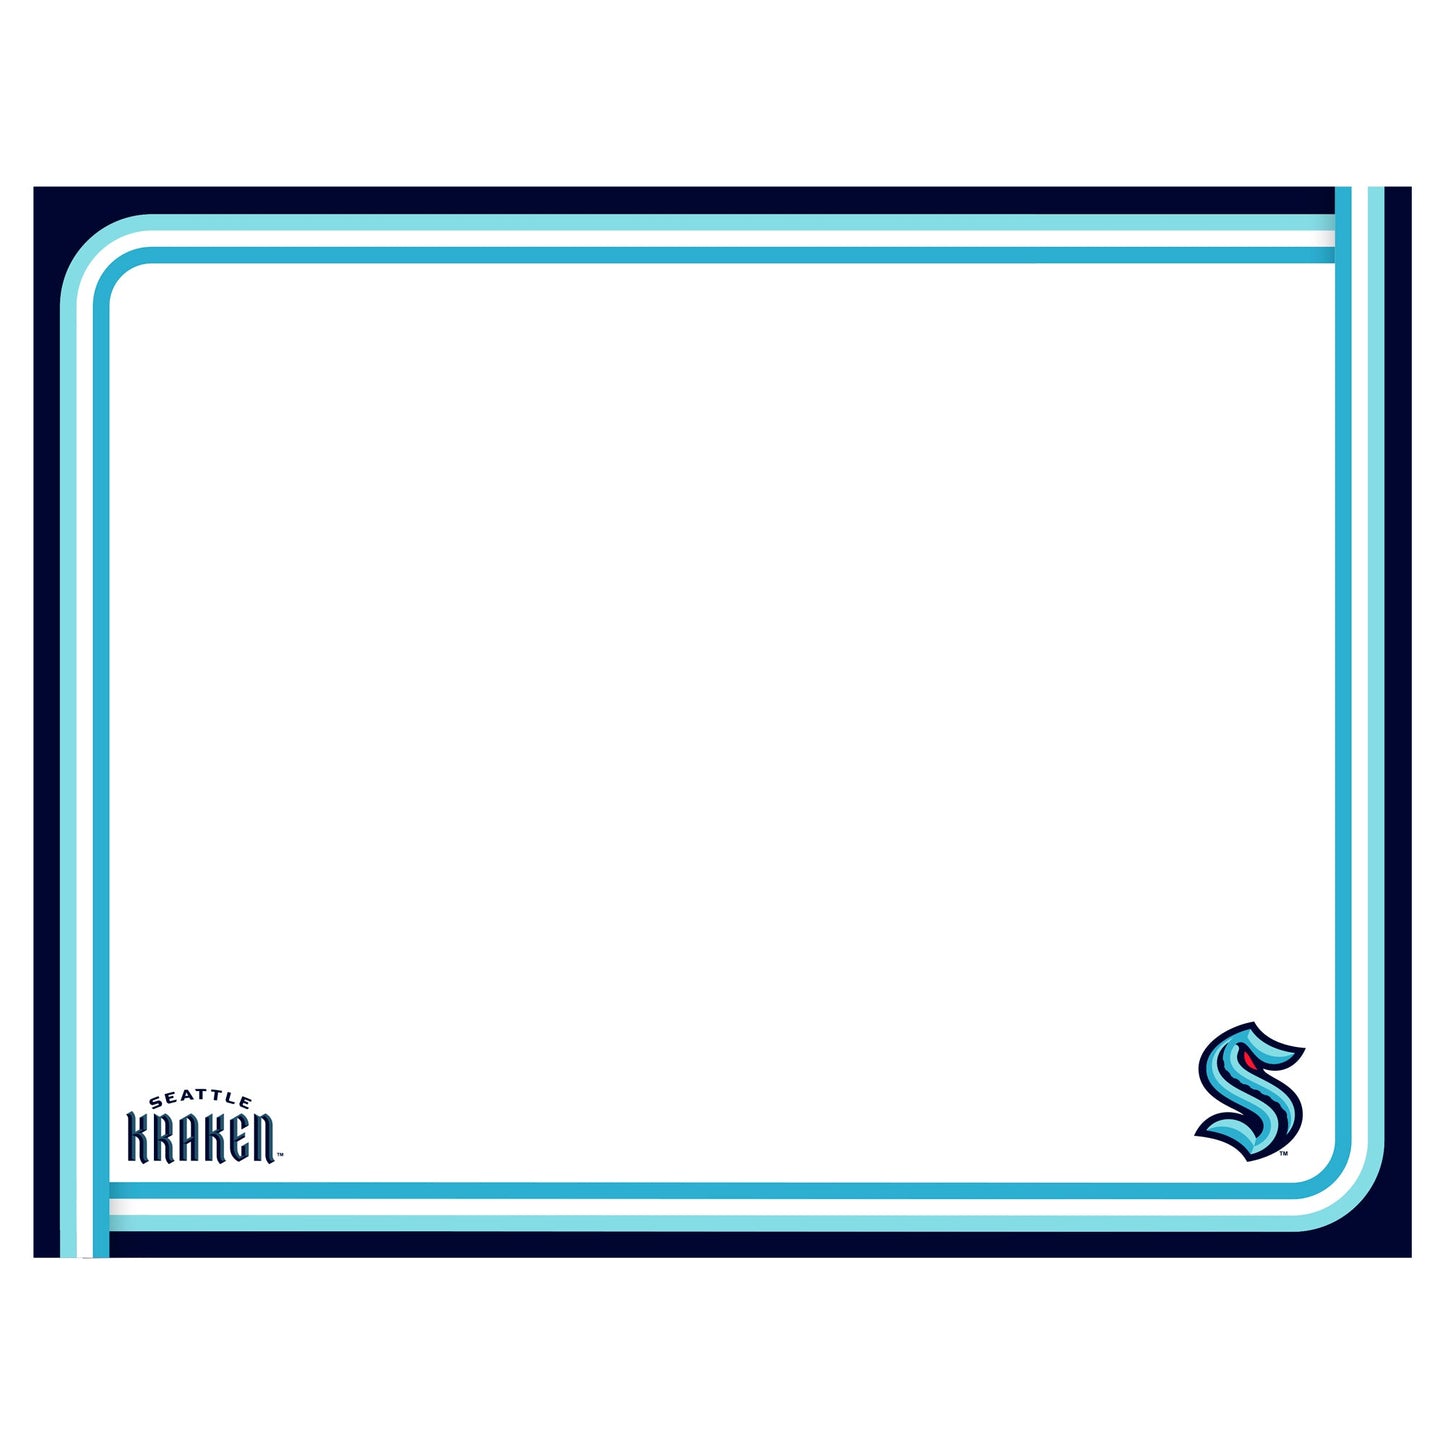 Seattle Kraken: Dry Erase Whiteboard - Officially Licensed NHL Removable Wall Decal